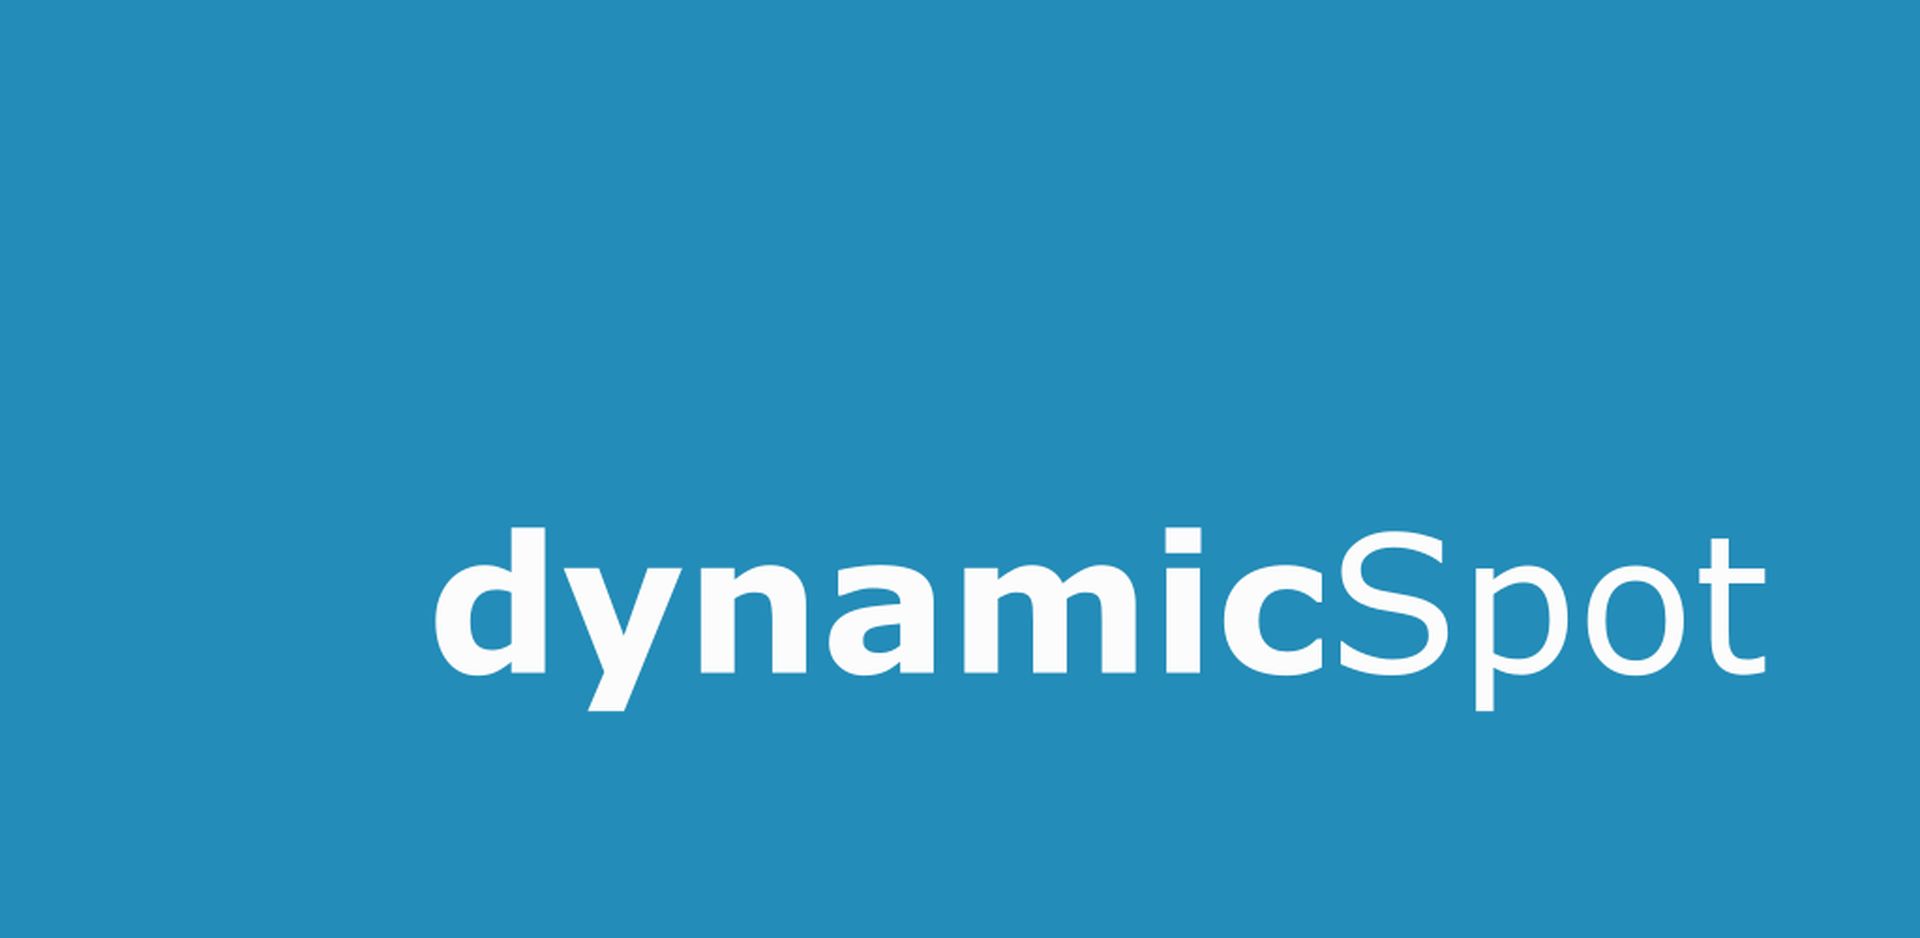 Today, we are going to be covering how to get Dynamic Island on Android, so that any Android user can get a comparable experience as any iPhone user.